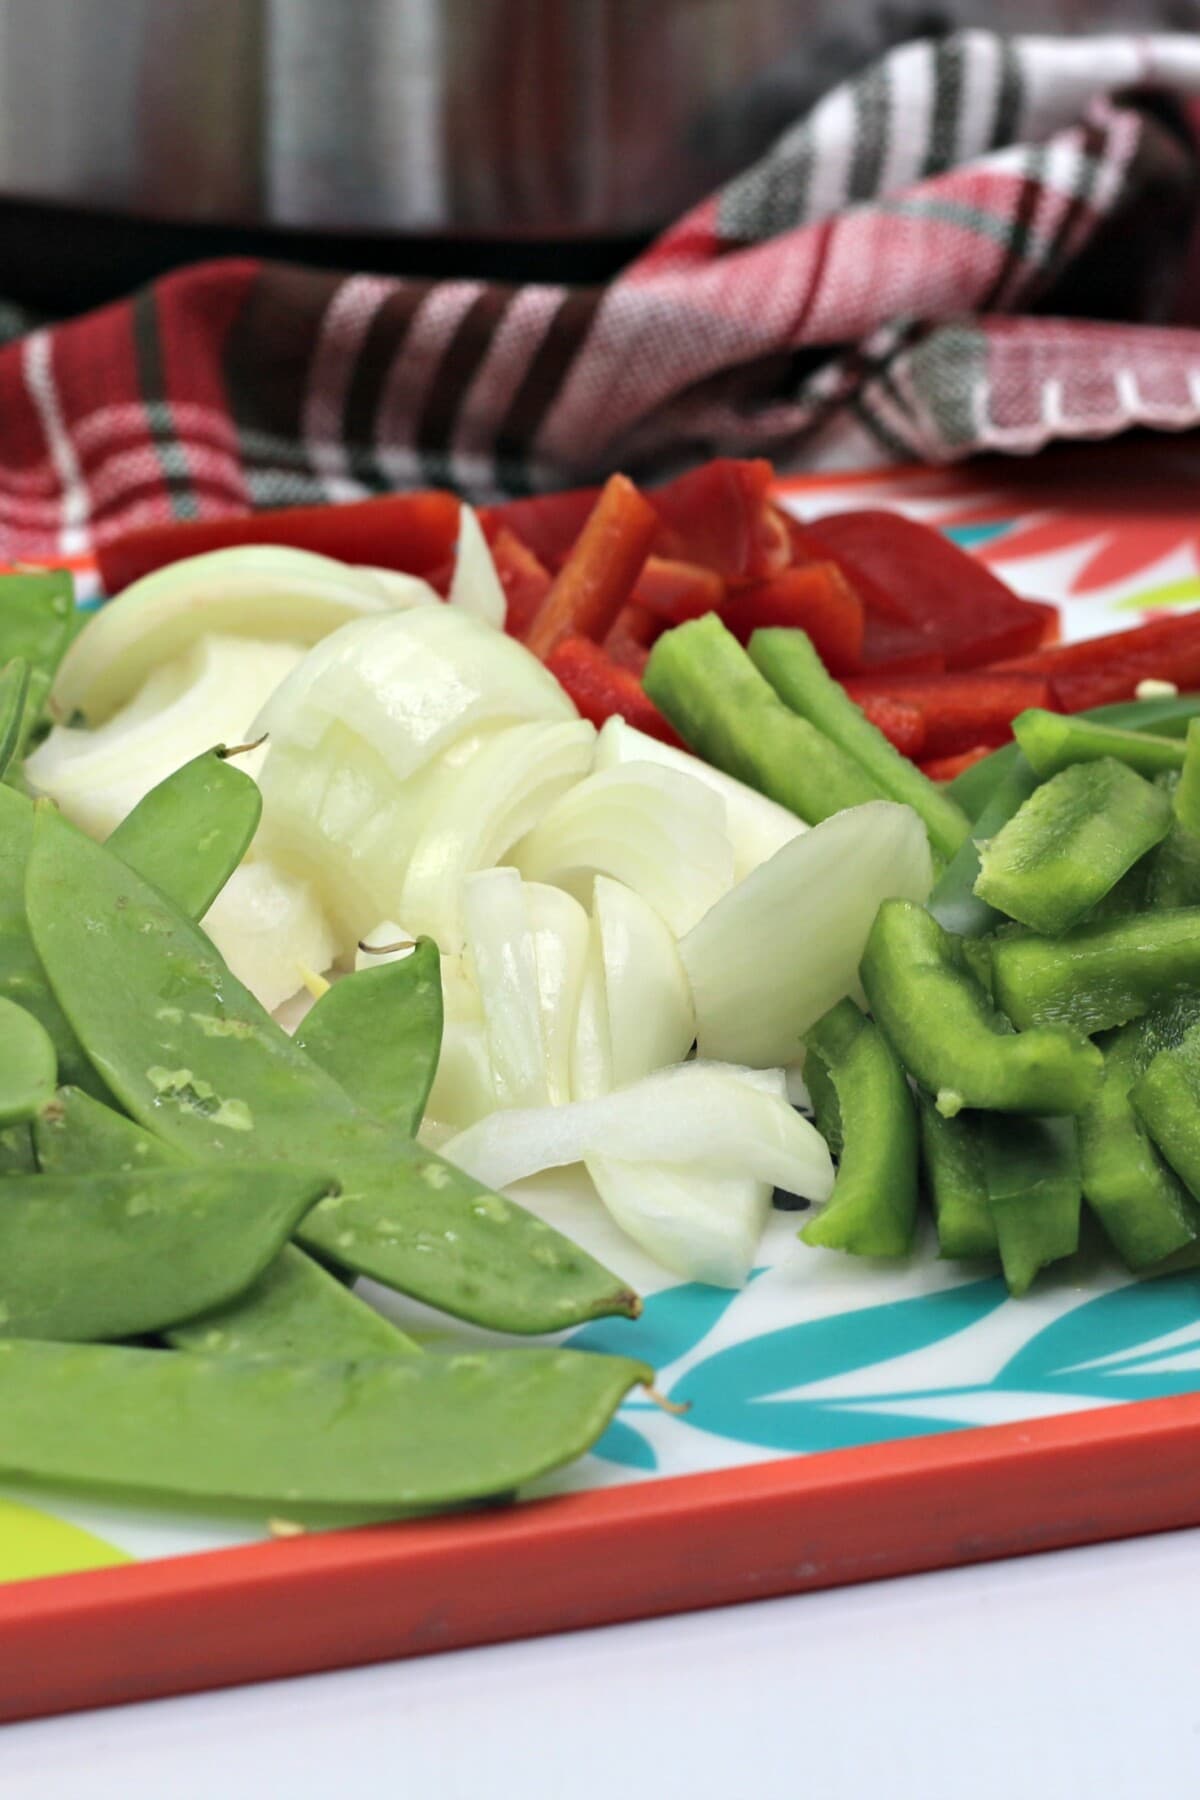 veggies on a placemat.